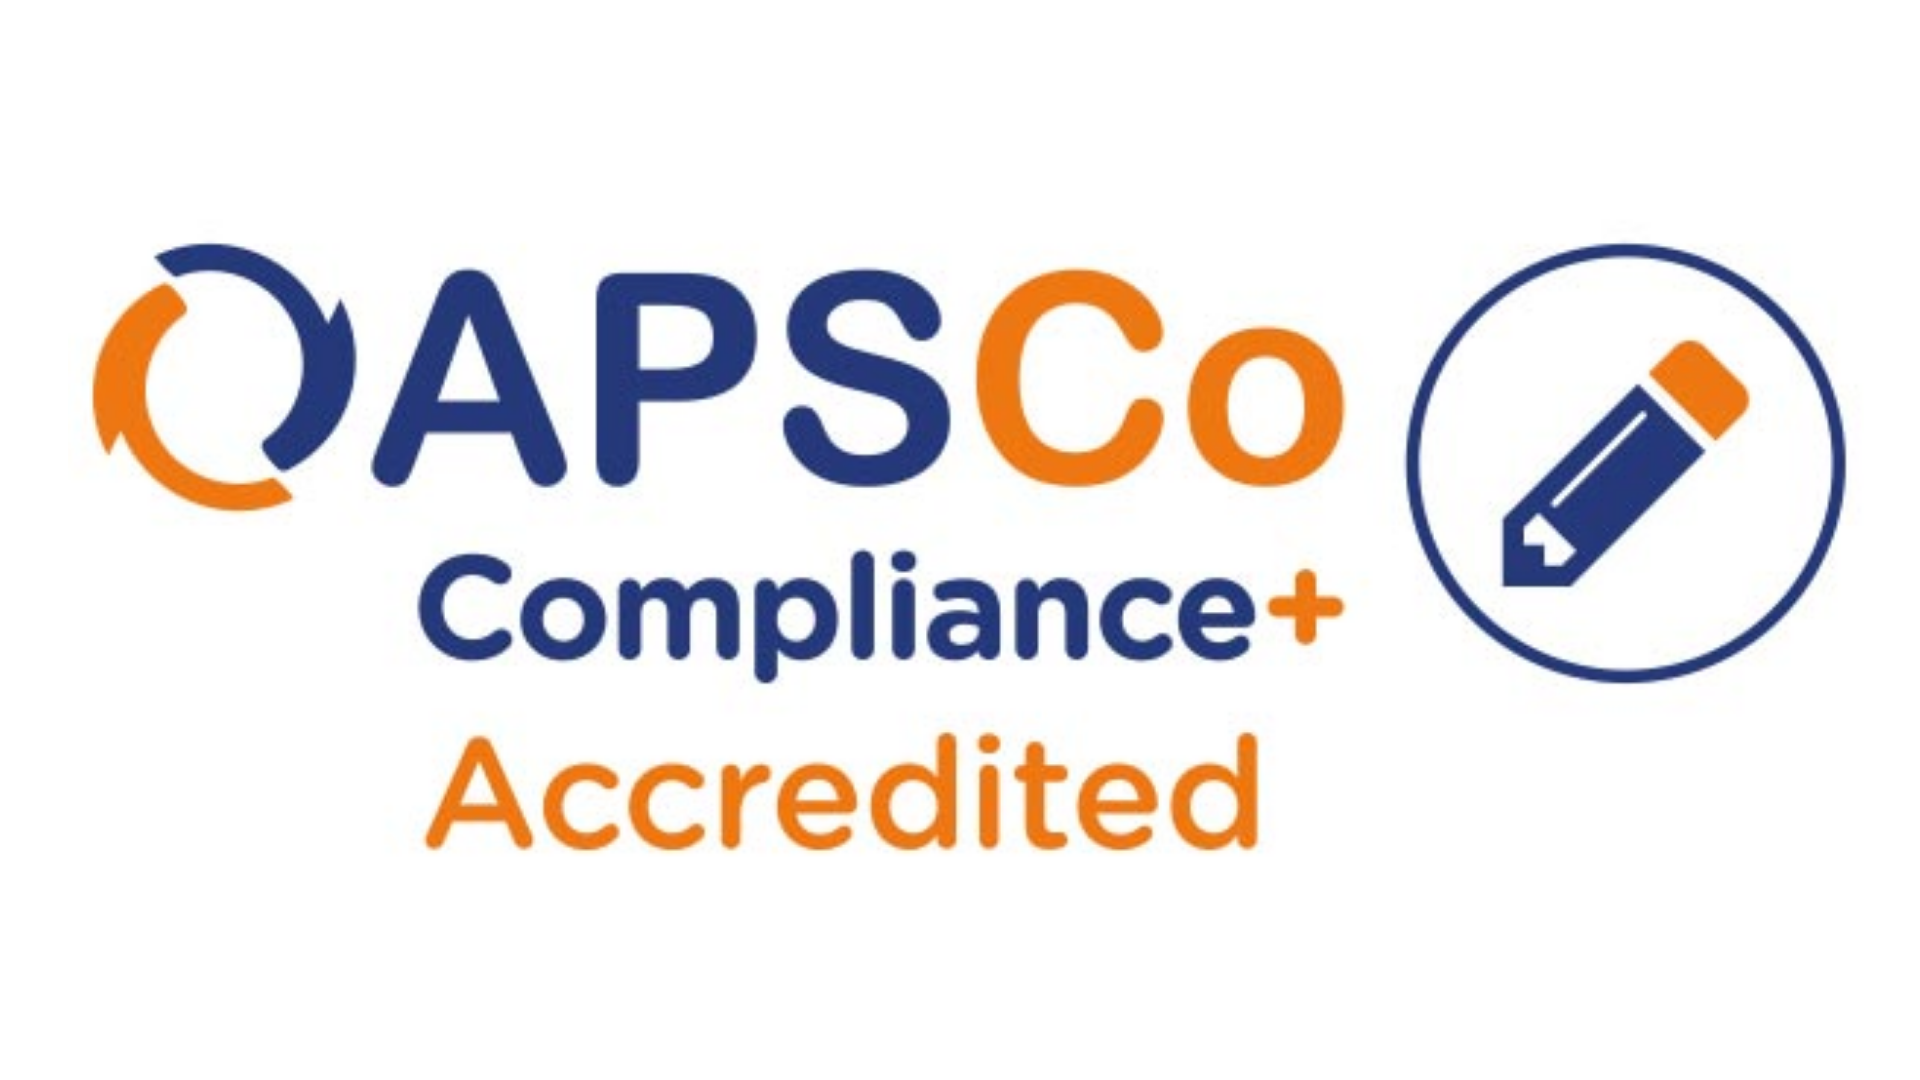 Smile Education are an APSCo Compliance+ accredited supply teaching agency based in the West Midlands.